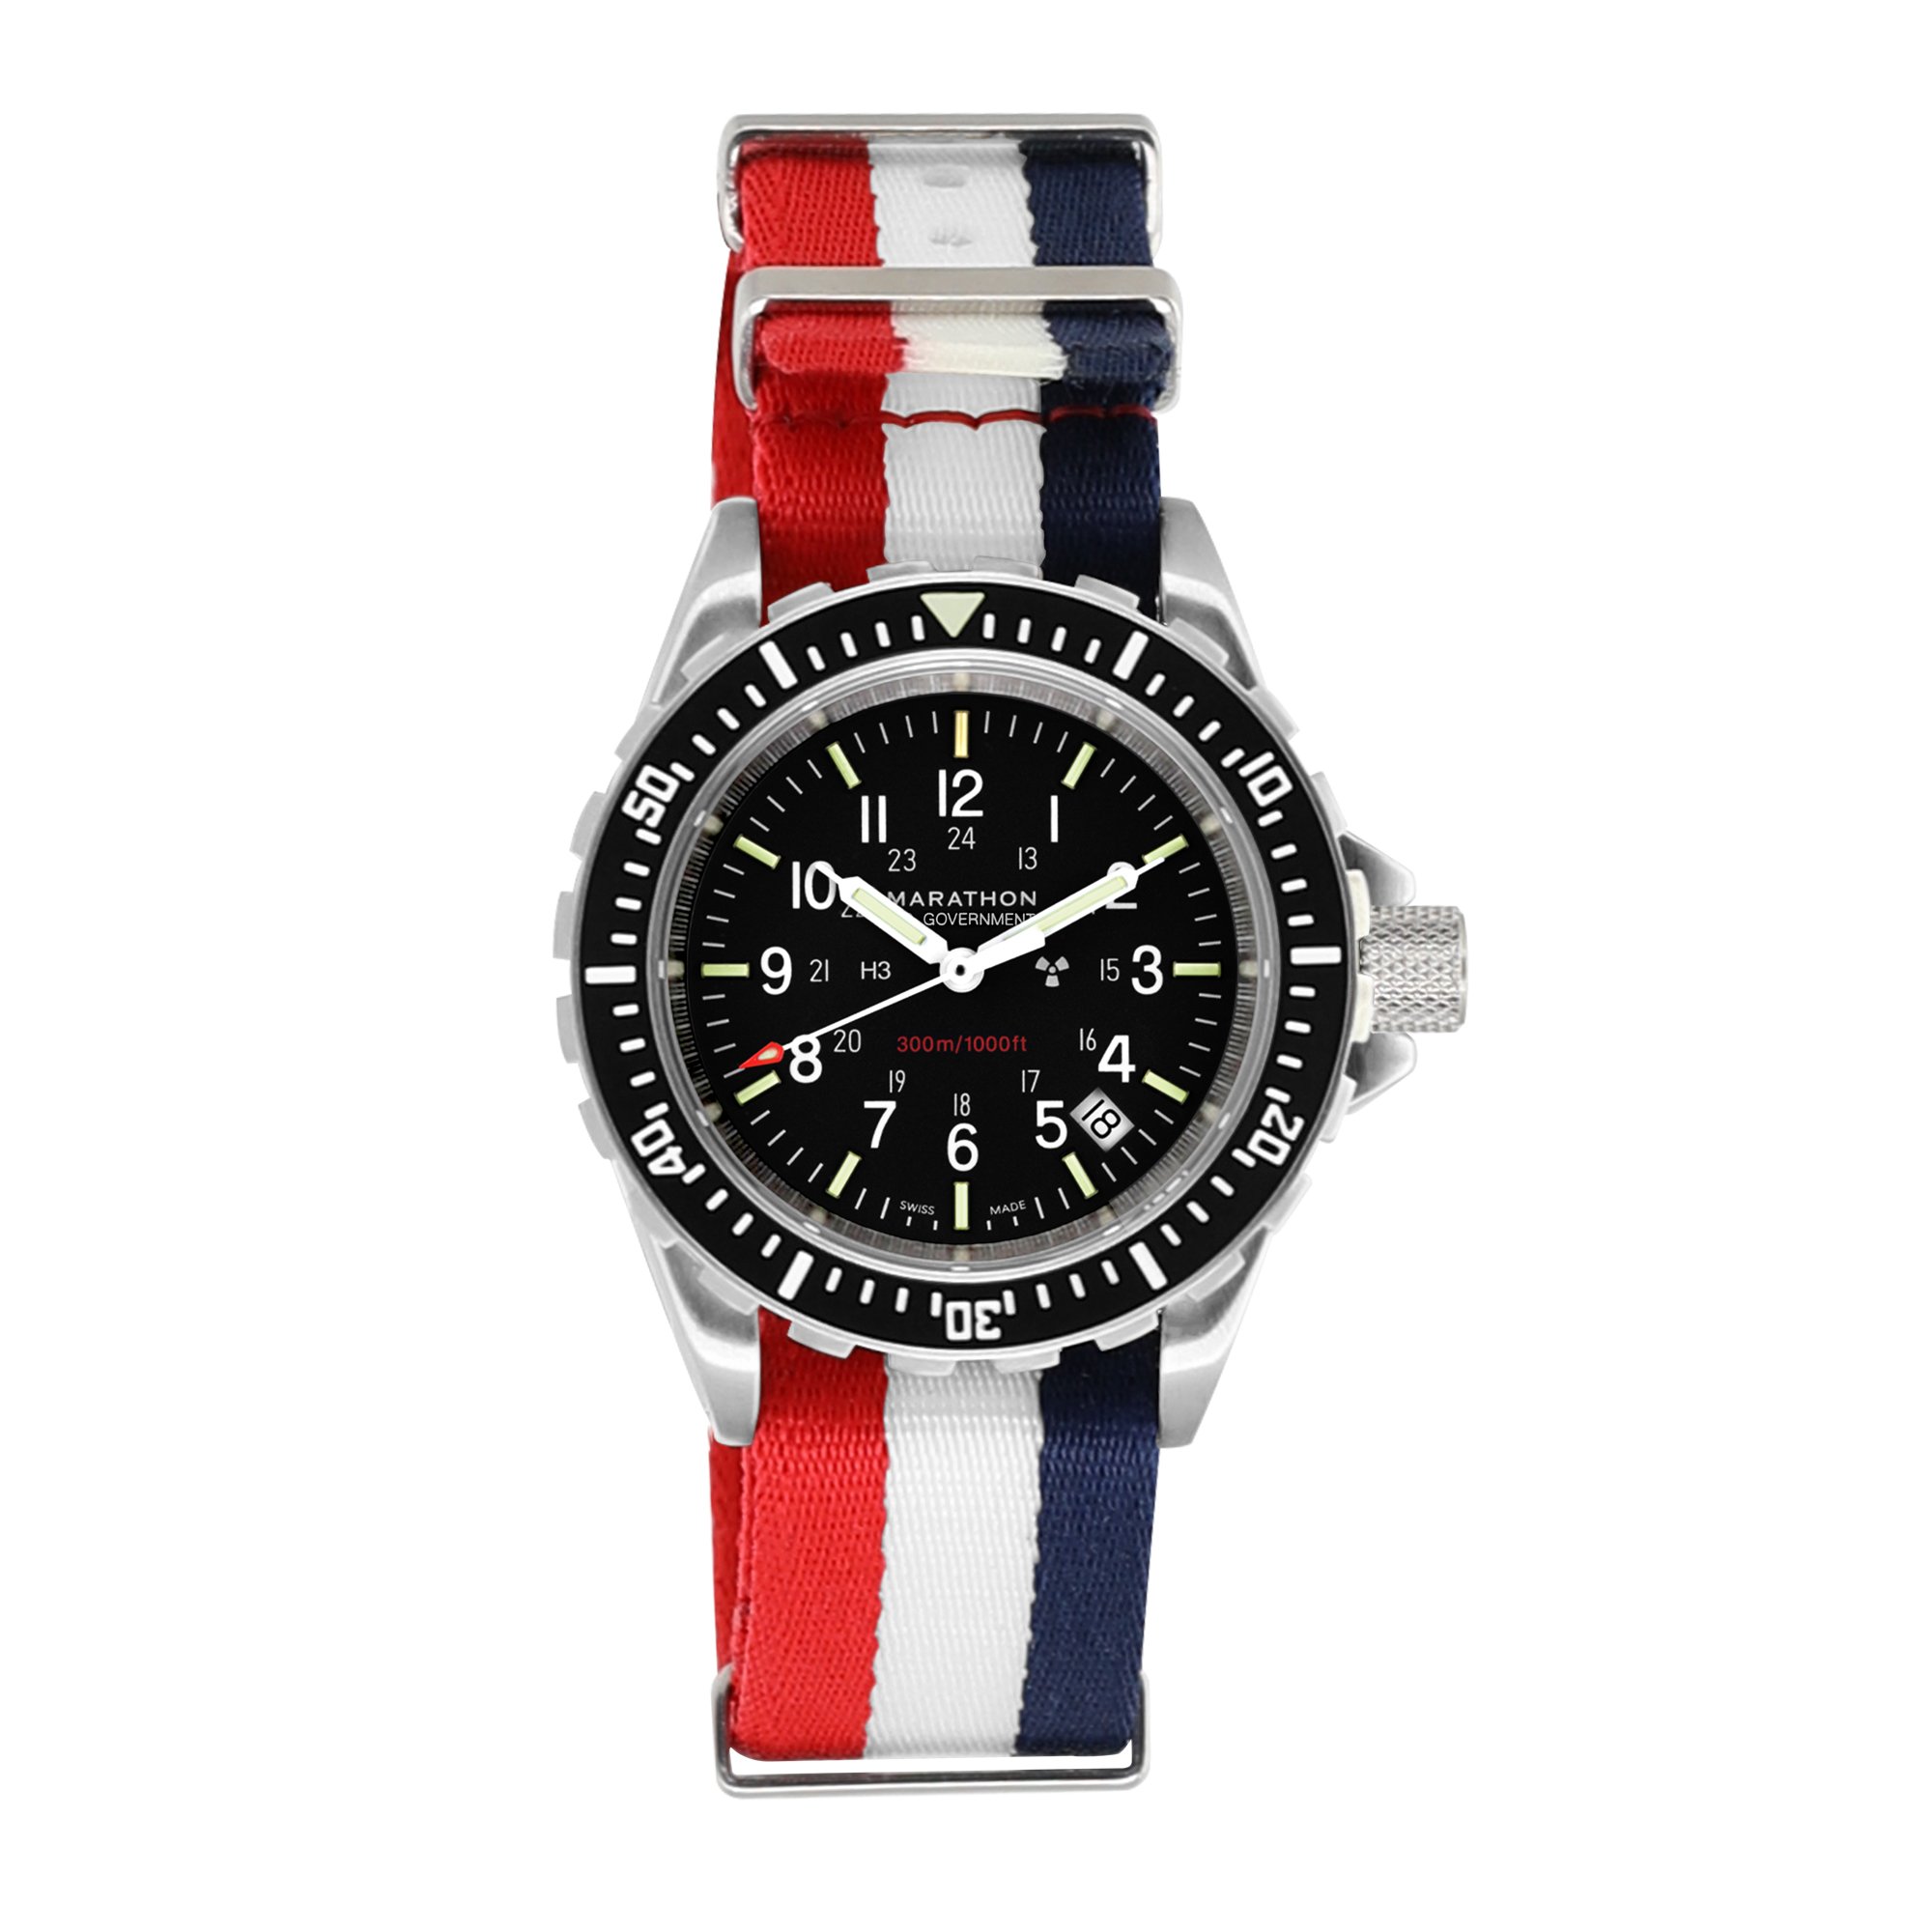 Marathon TSAR Search and Rescue Dive Watch - US Government Markings